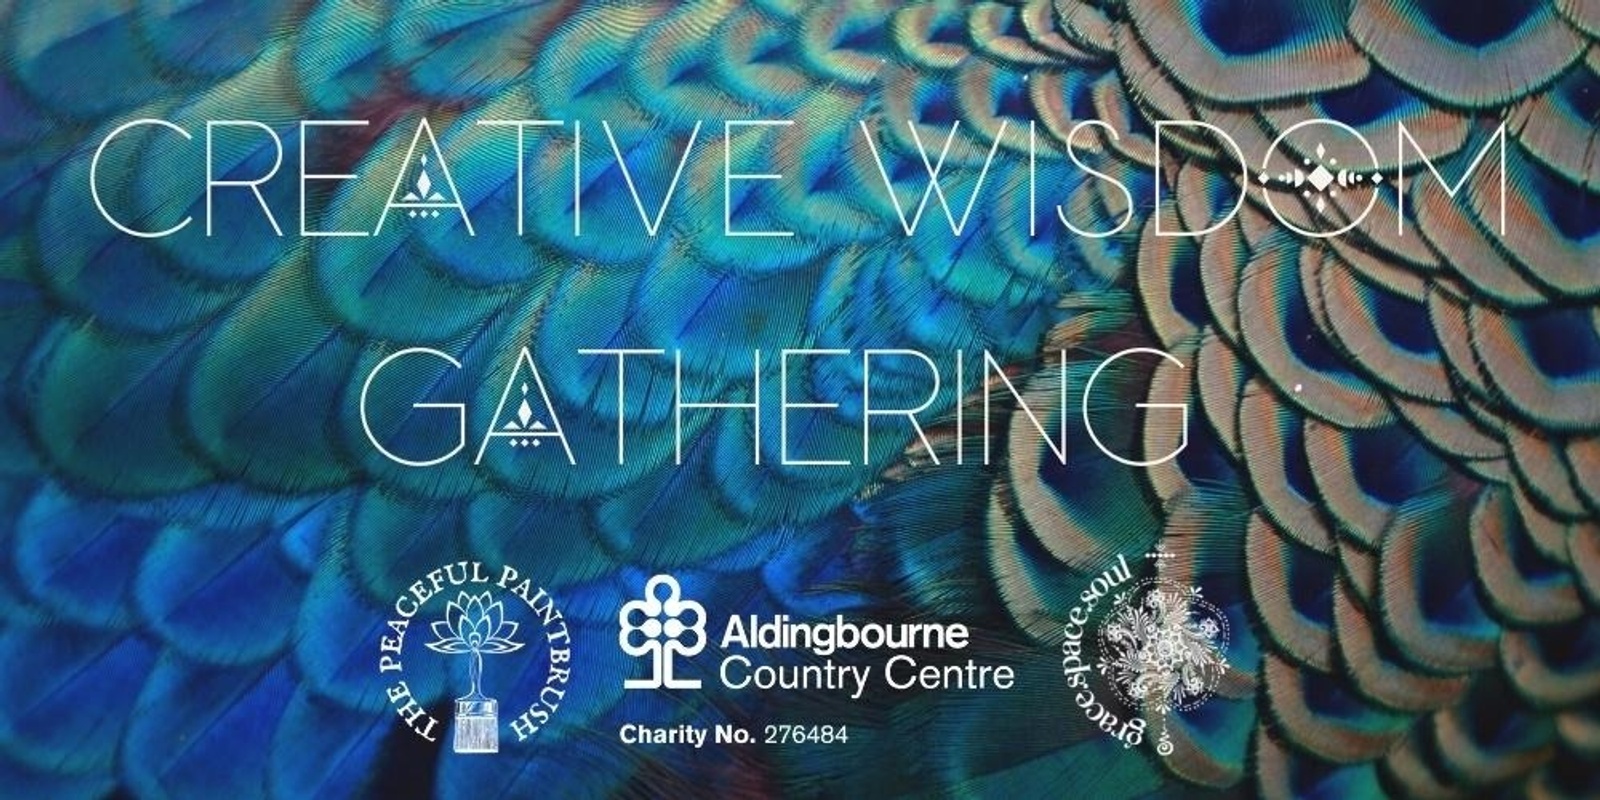 Banner image for Creative Wisdom Gathering